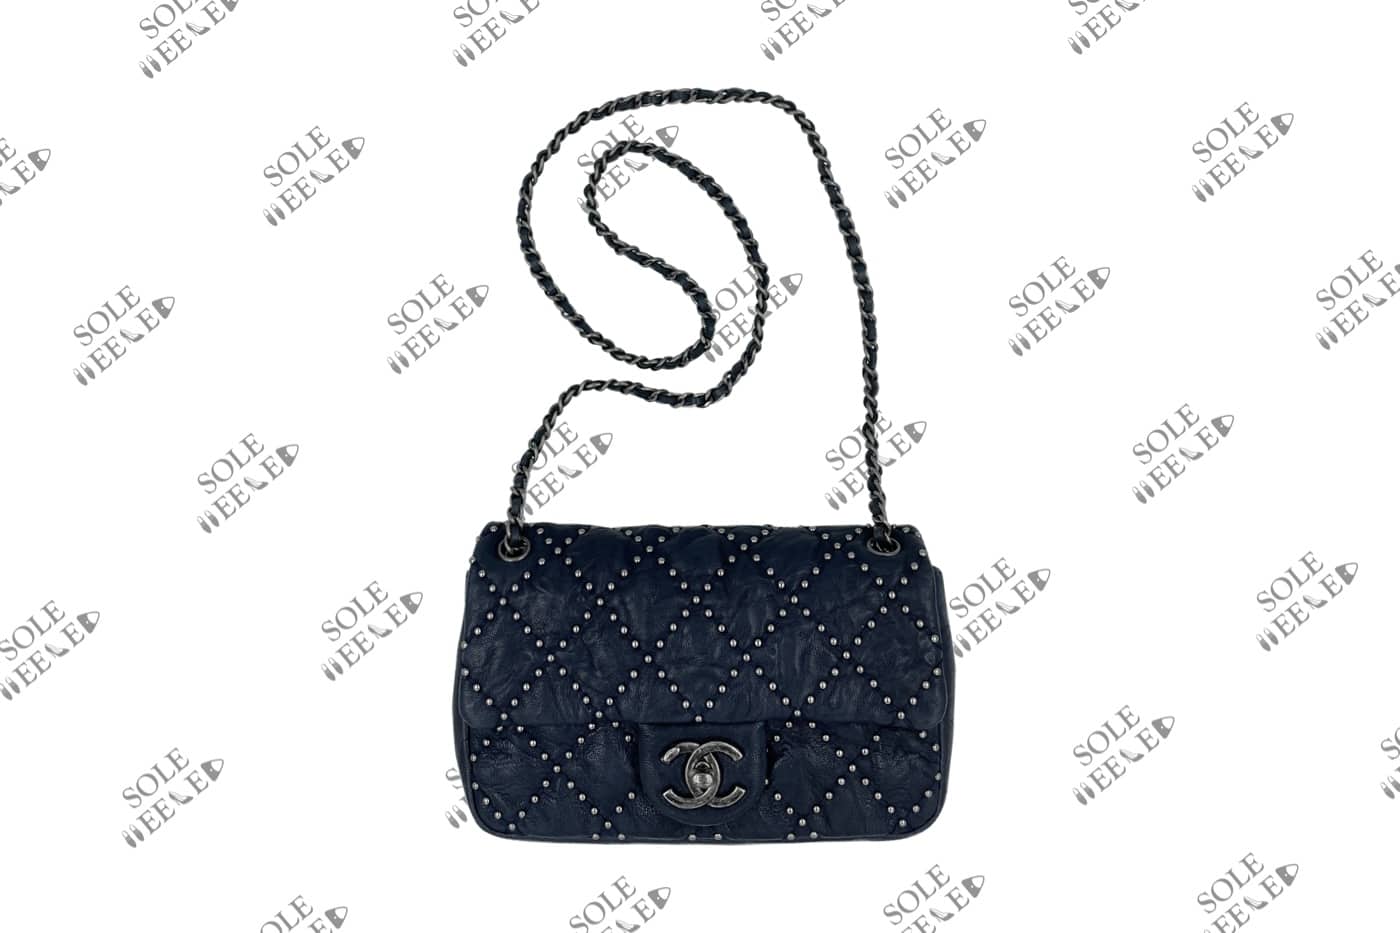 Chanel Bag Chain Strap Leather Replacement — SoleHeeled